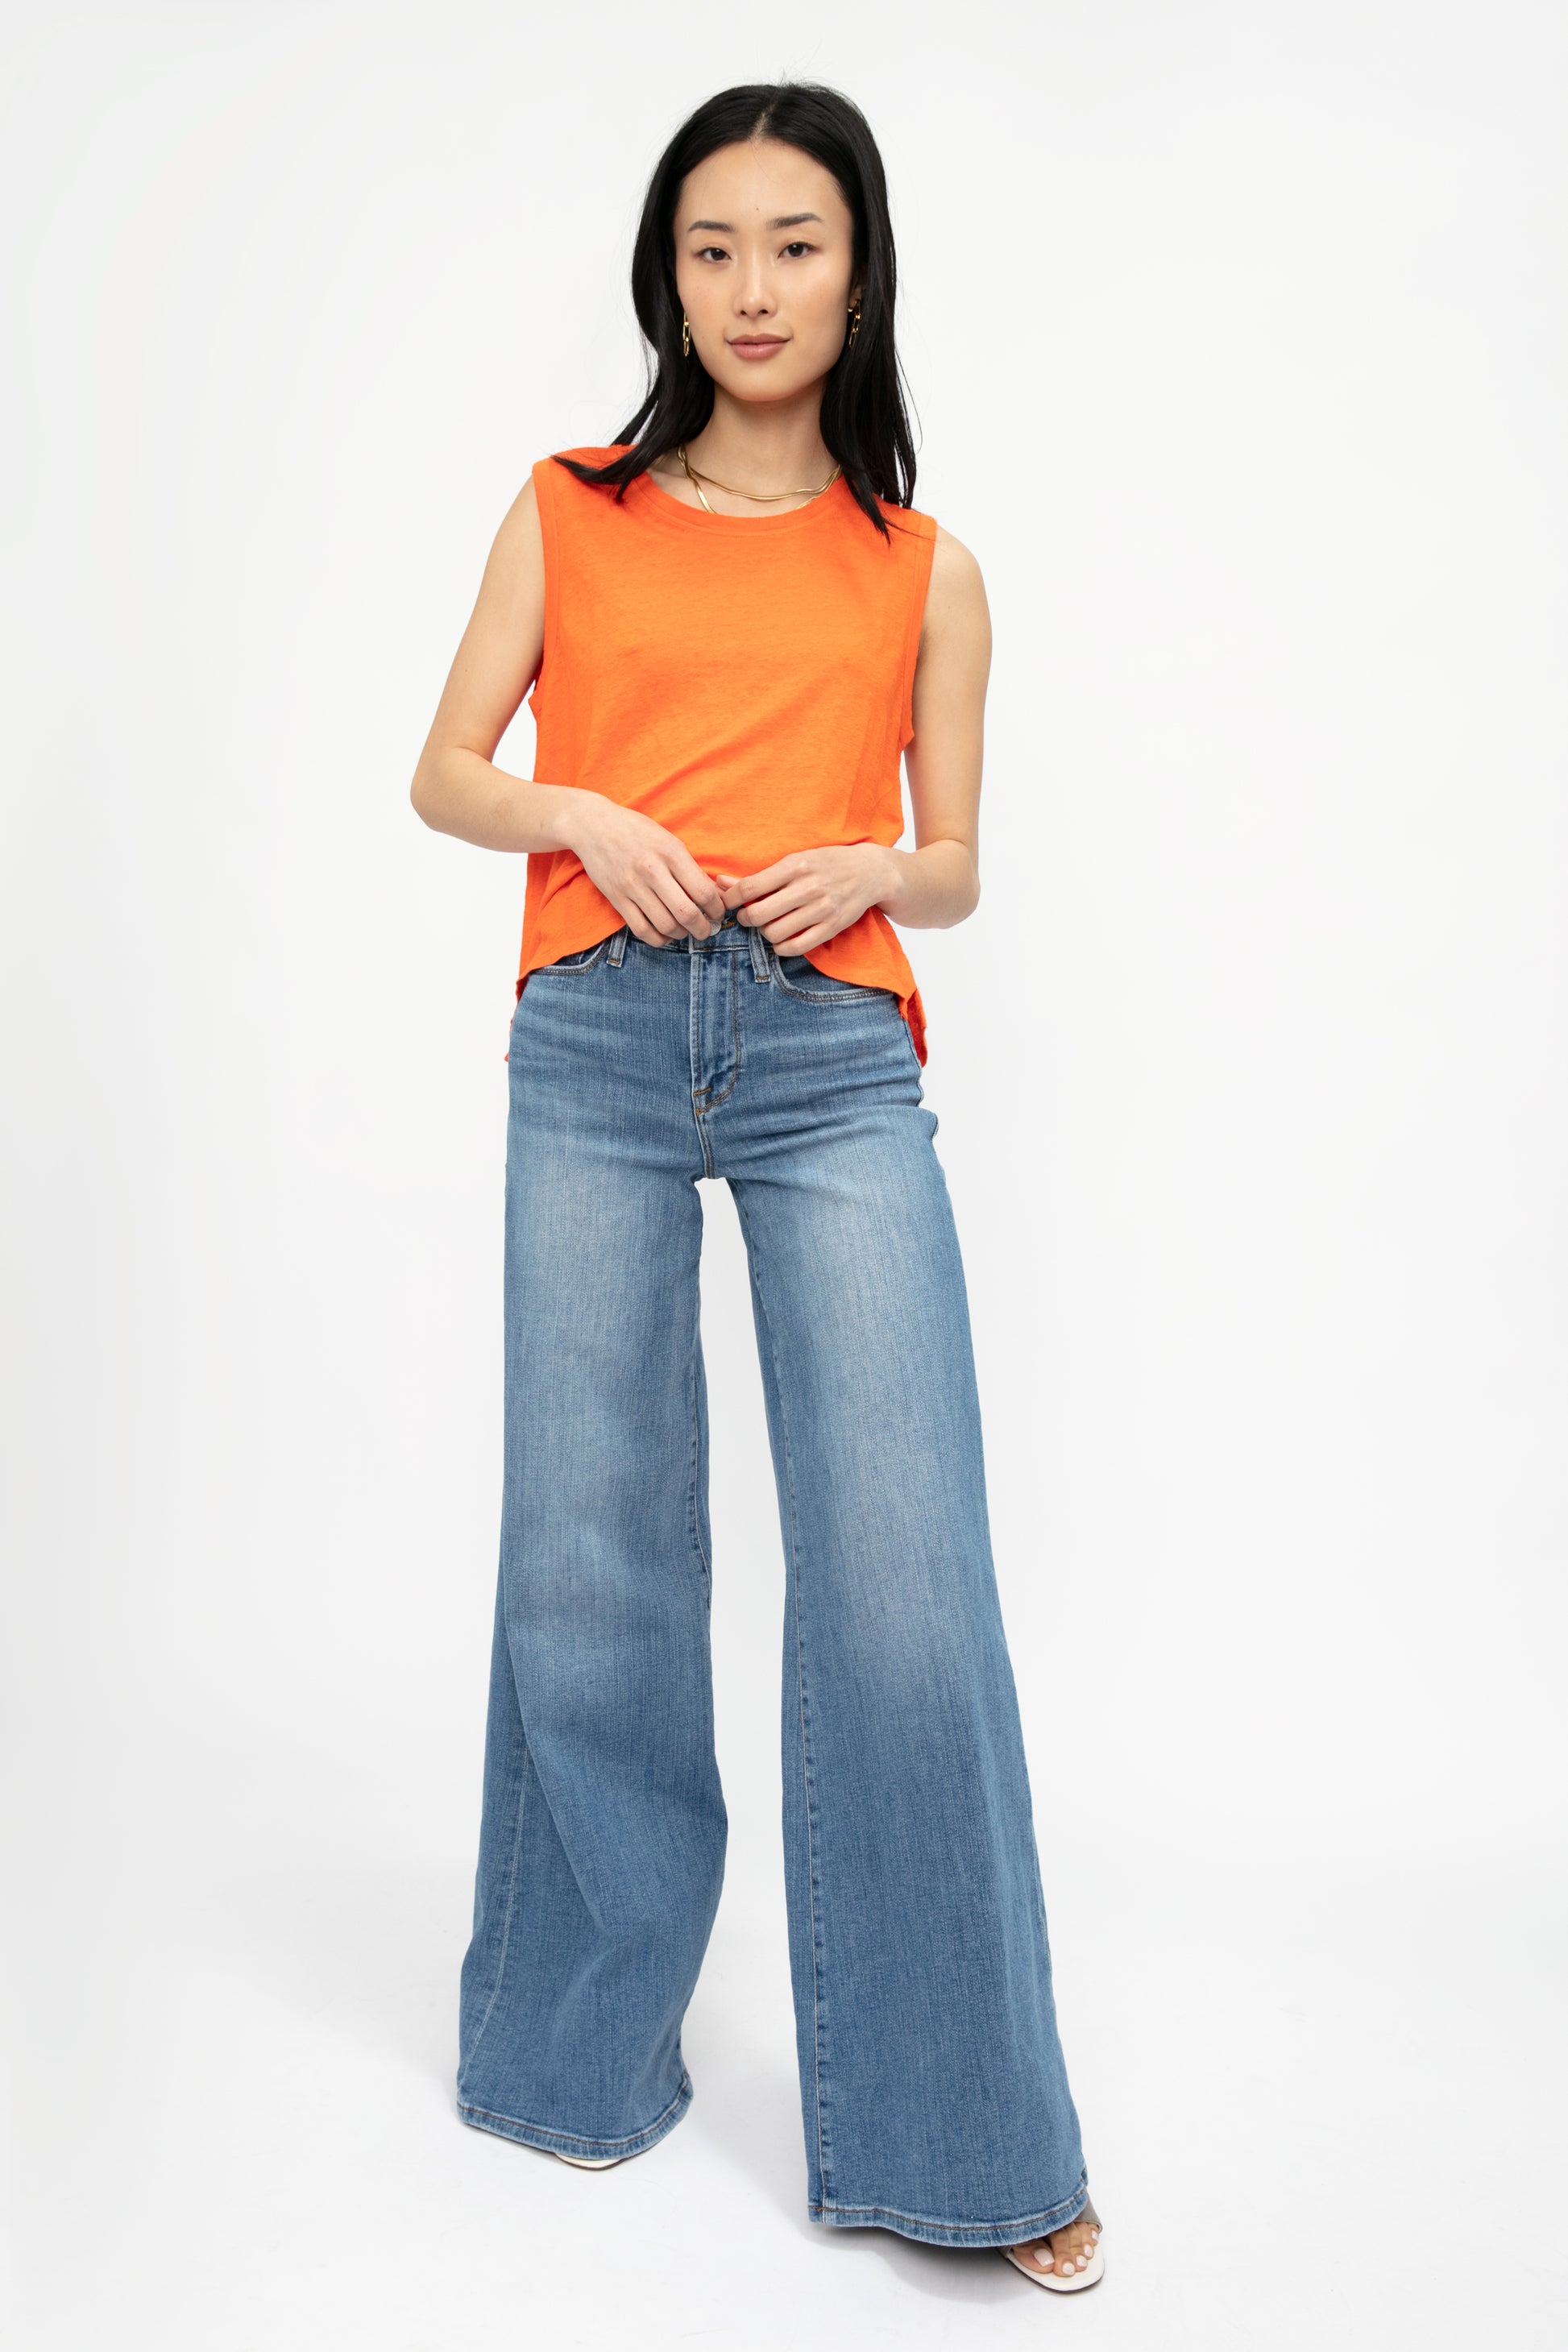 FRAME Le Palazzo Pant in Blue Fade